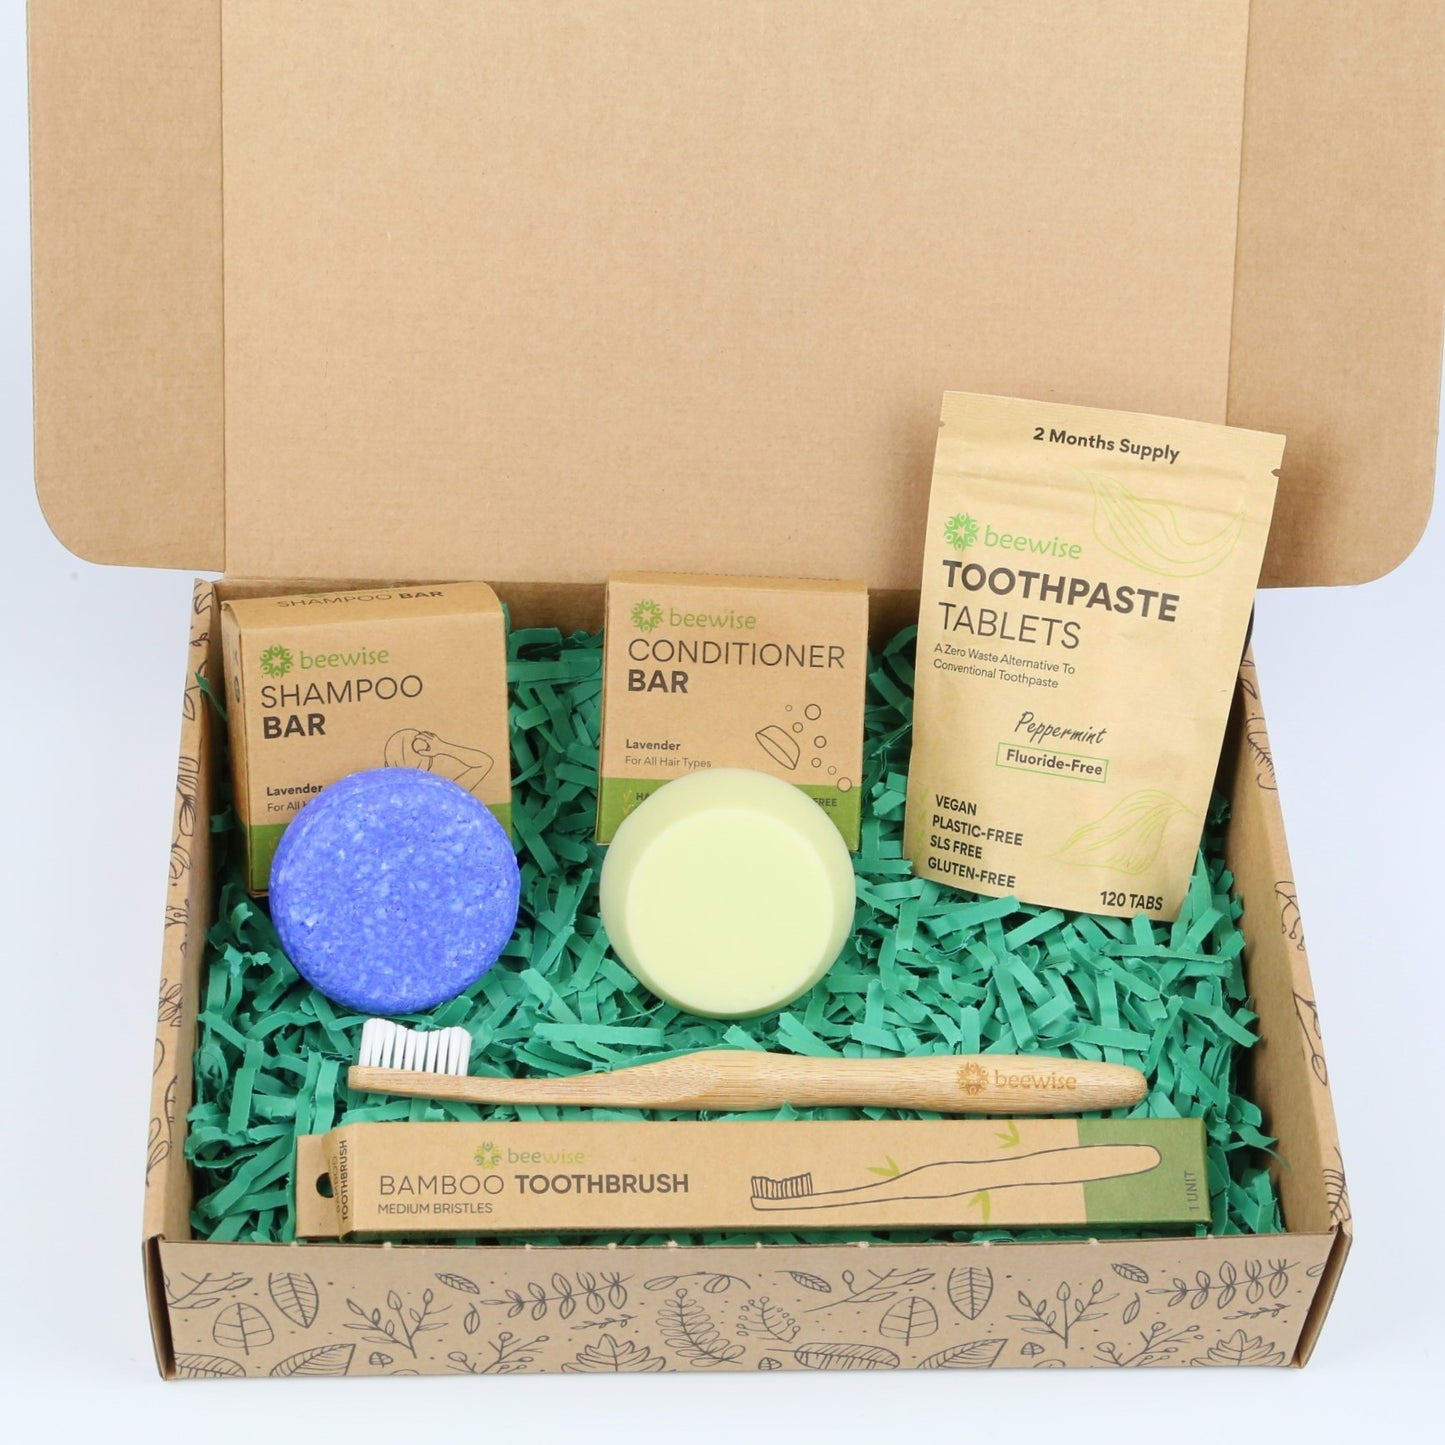 eco gift box with sustainable products with shampoo bar toothpaste tablets and bamboo toothbrush